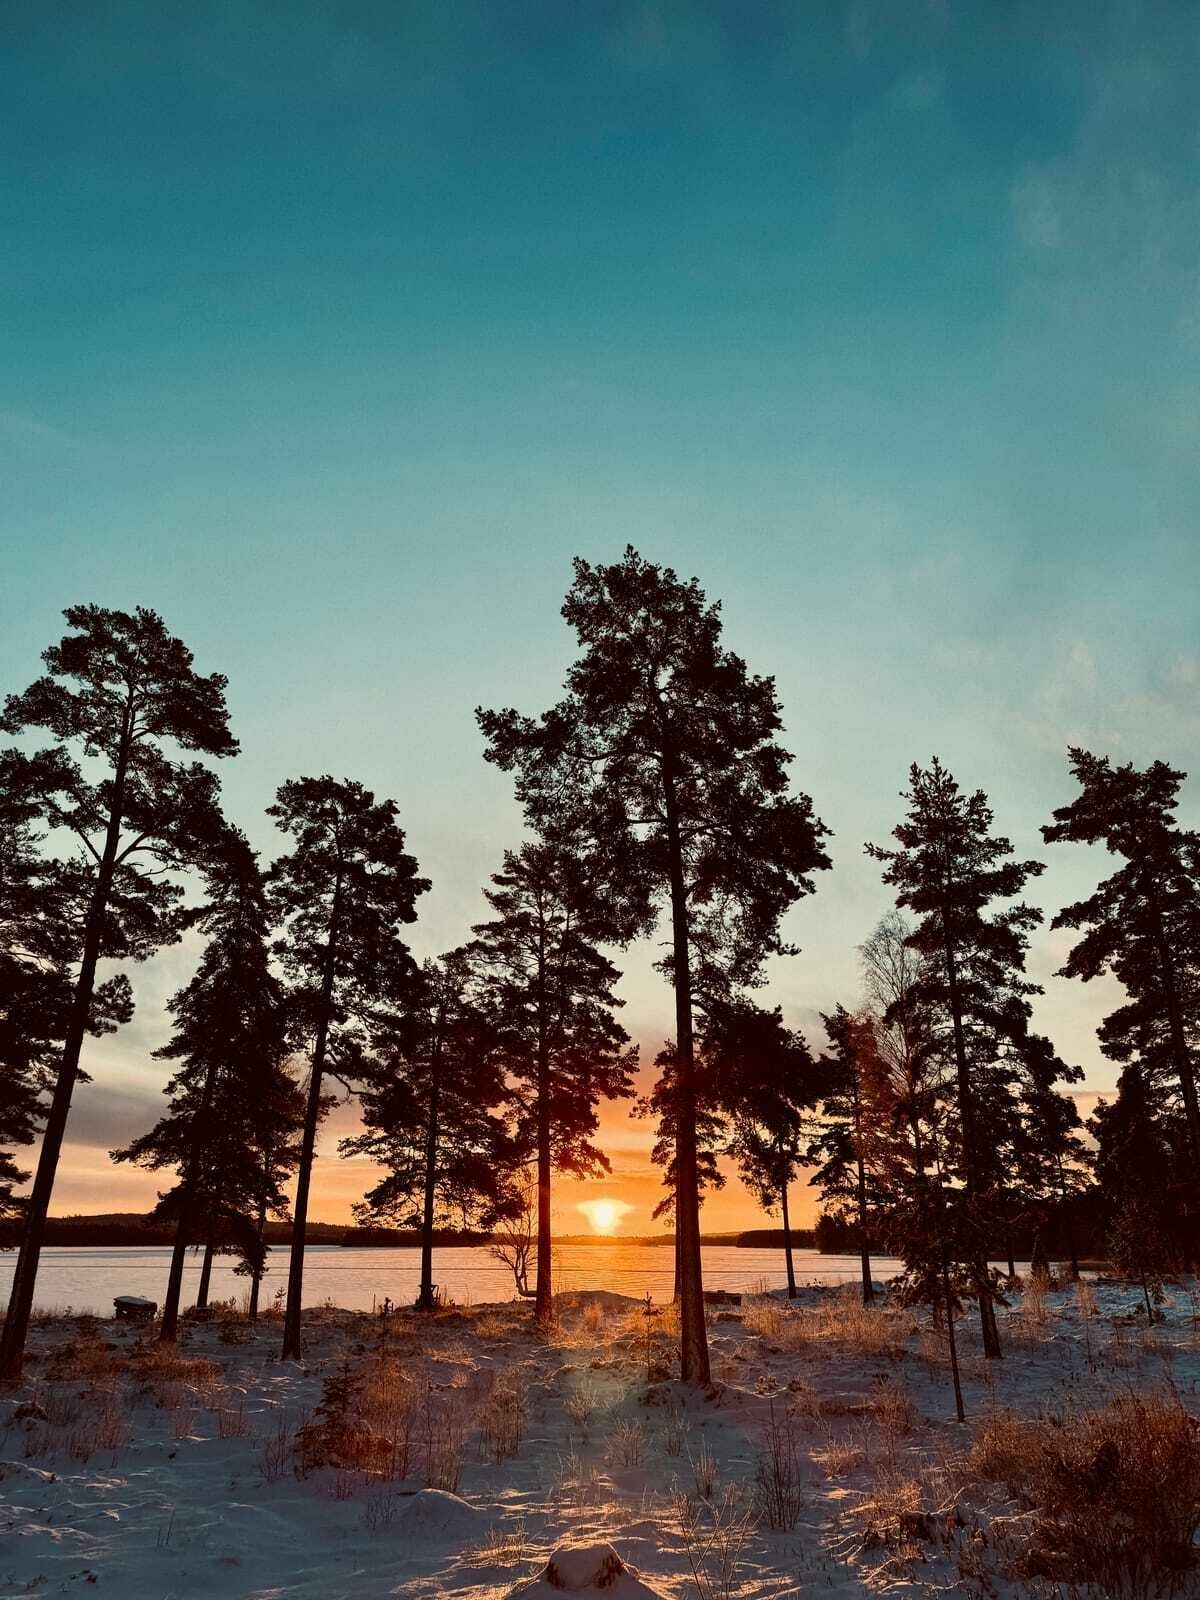 Sunrise view through the silhouette of pine trees, with golden light reflecting on a frozen lake and snow-covered ground.